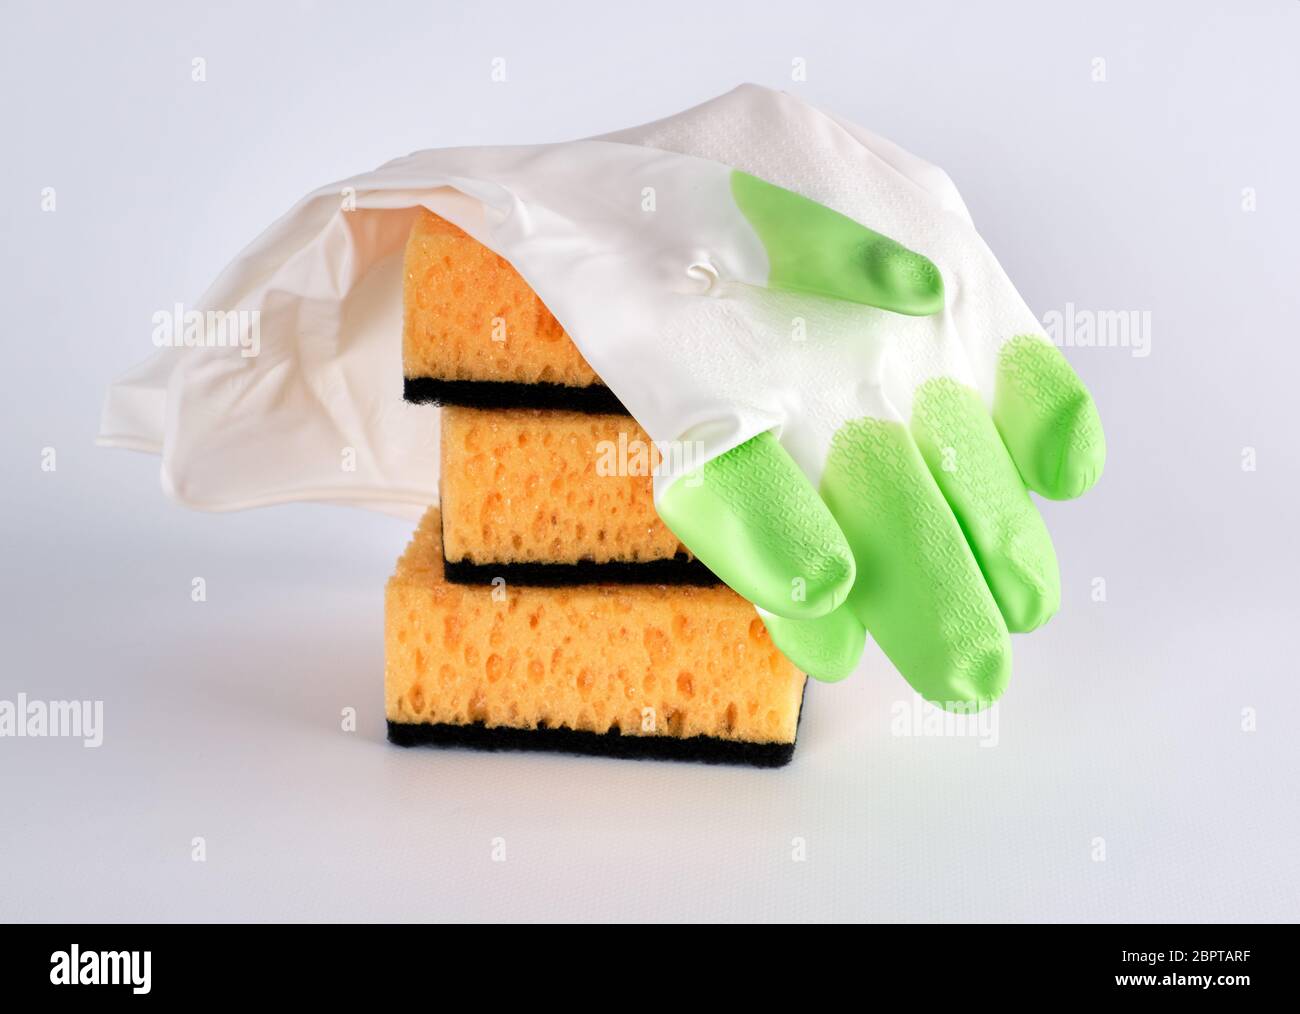 https://c8.alamy.com/comp/2BPTARF/stack-of-yellow-kitchen-sponges-for-washing-dishes-and-gloves-on-a-white-background-2BPTARF.jpg